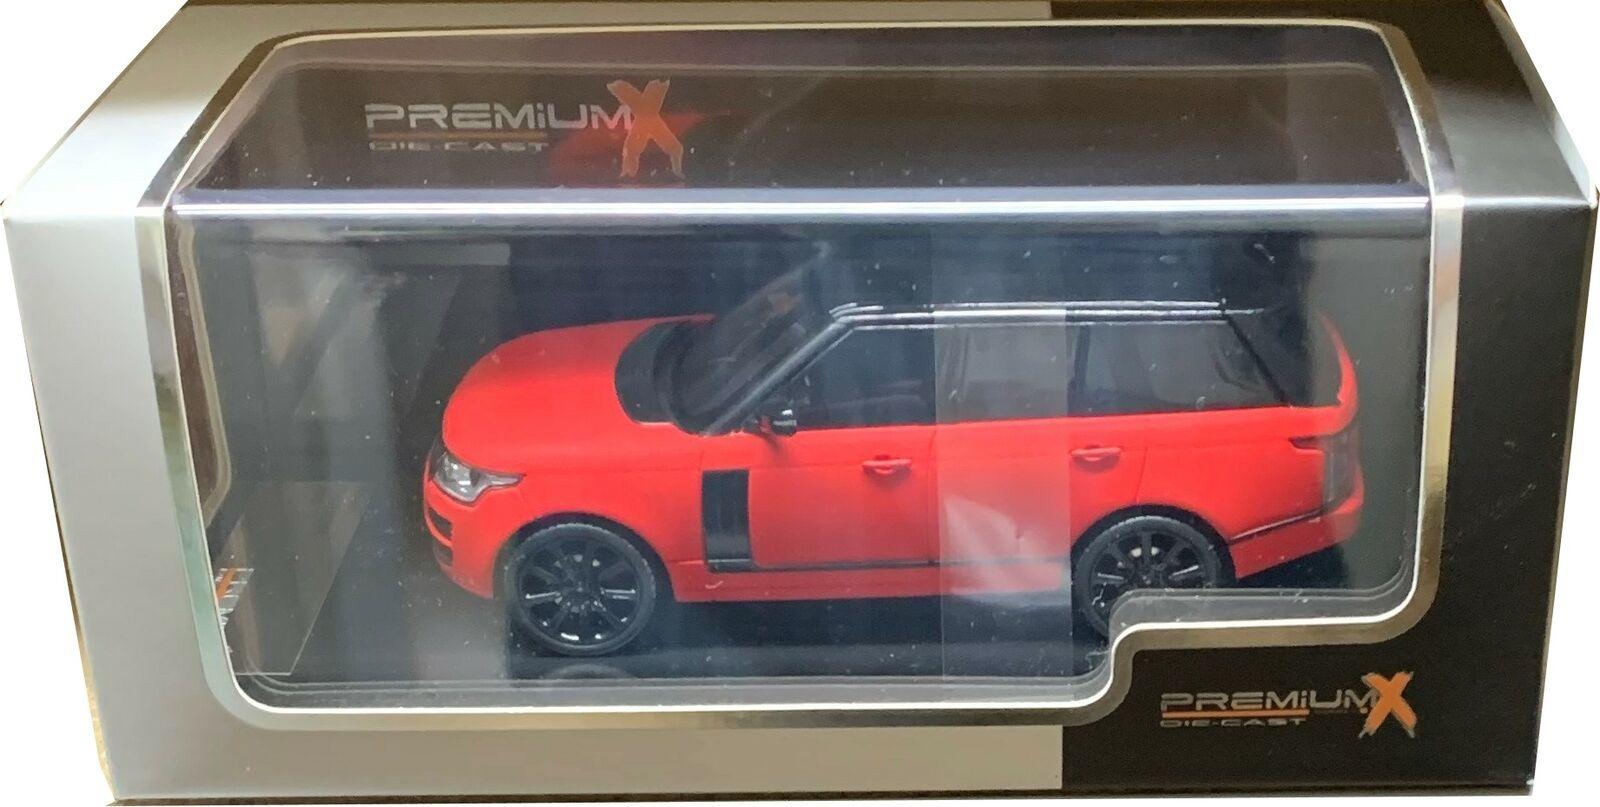 Range Rover 2013, matt red with black pac 1:43 scale model from Premium X Model